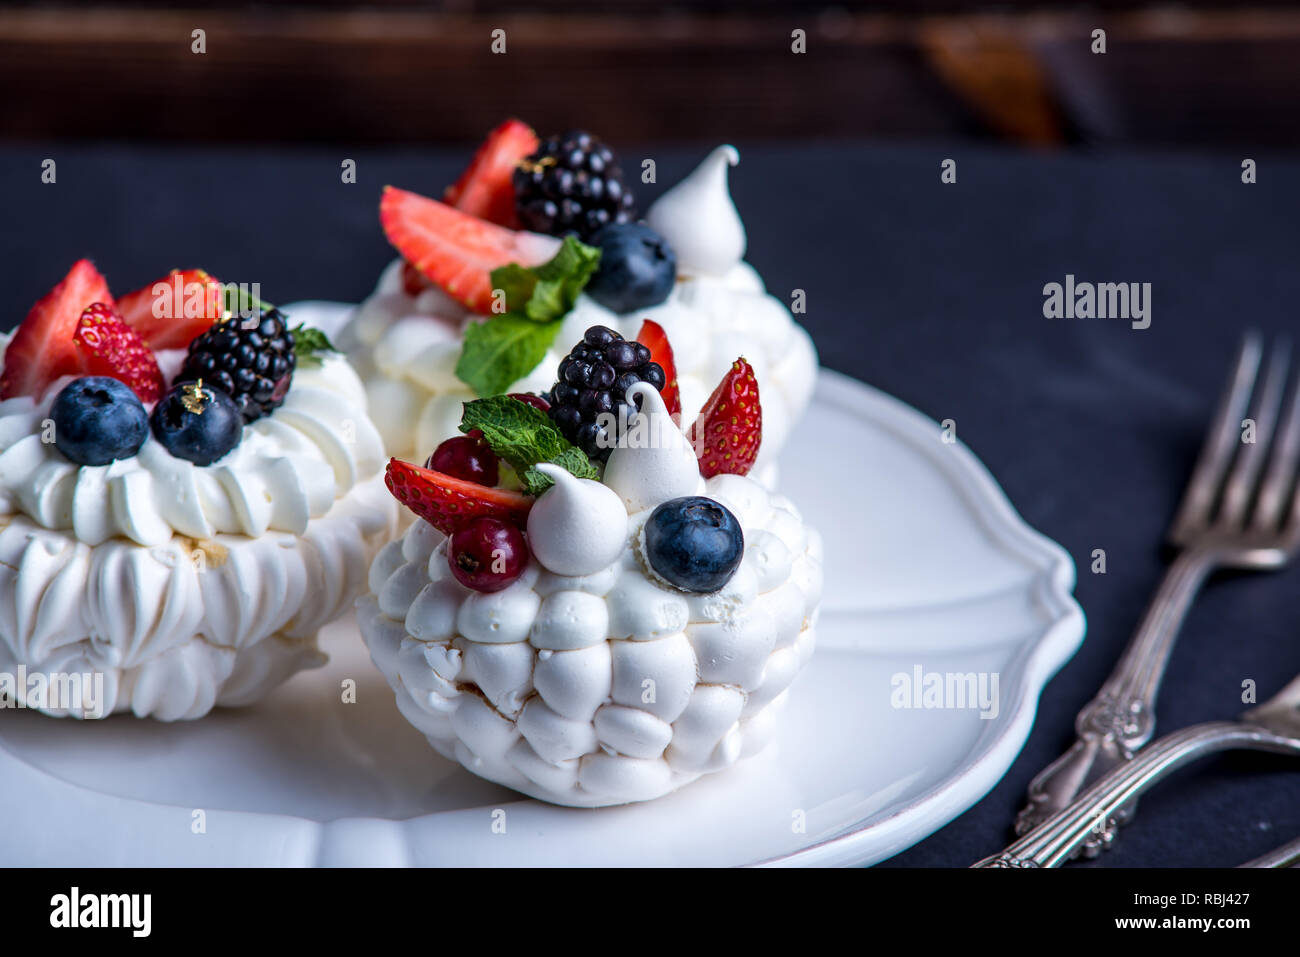 Delicate white meringues with fresh berries on the plate. Dessert Pavlova close-up. Dark background. A festive wedding cake. Stock Photo